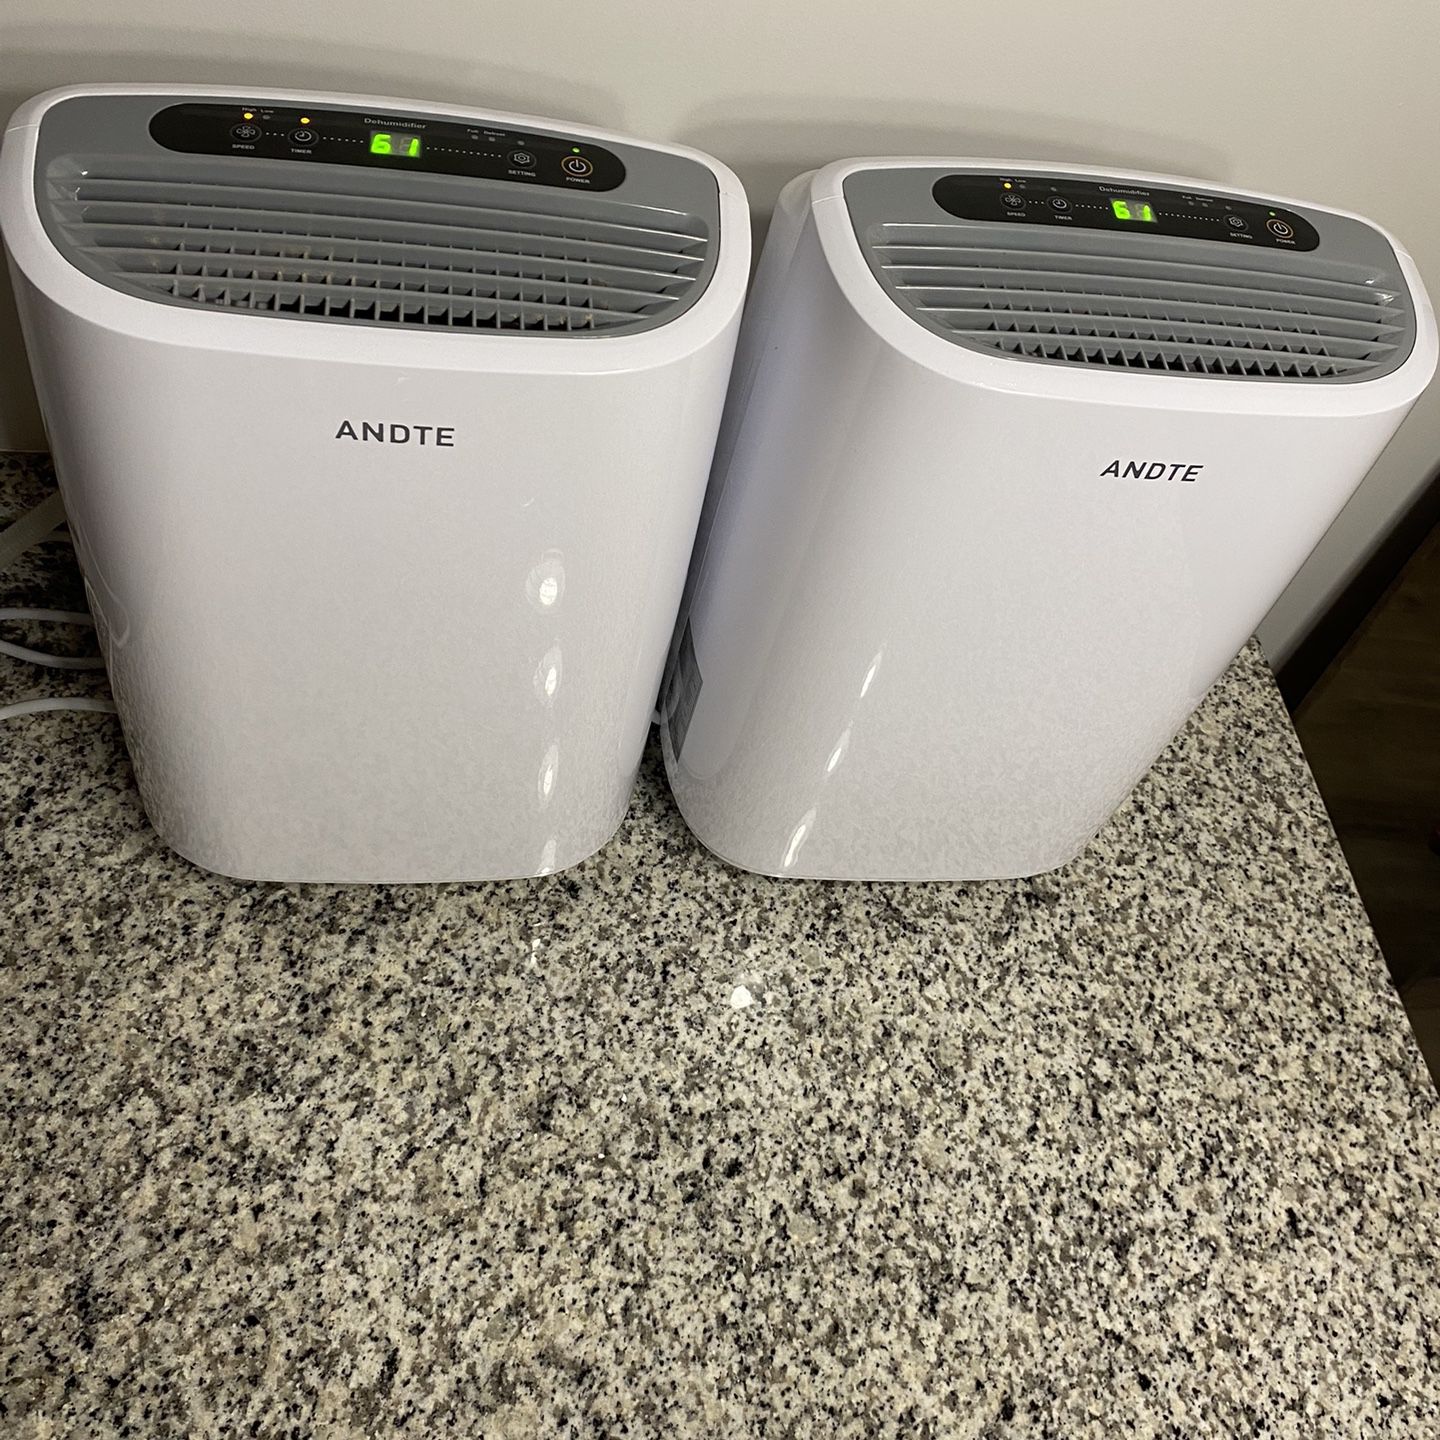 2 ANDTE Dehumidifiers 